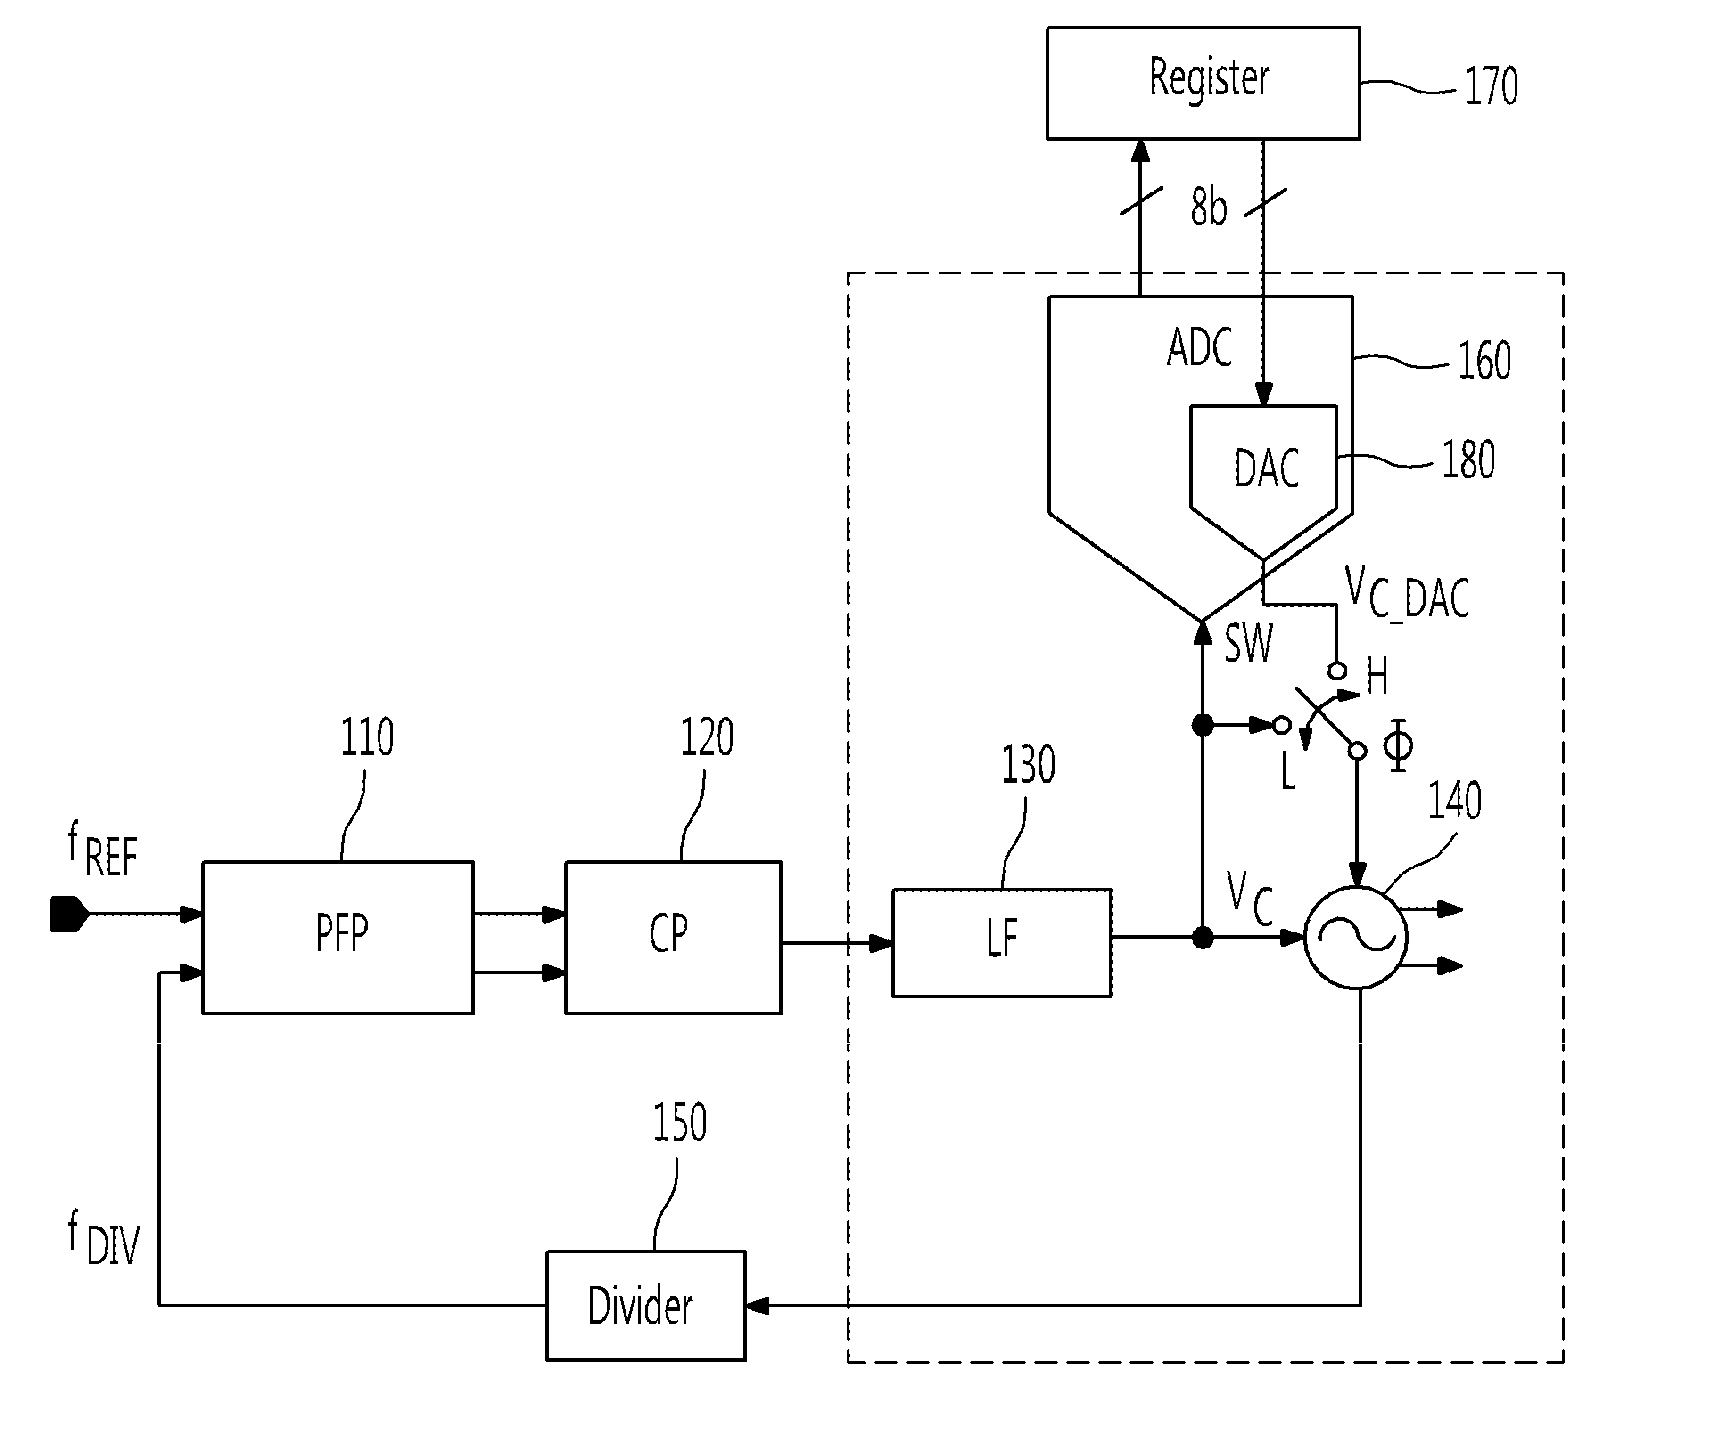 Phase-locked loop circuit comprising voltage-controlled oscillator having variable gain